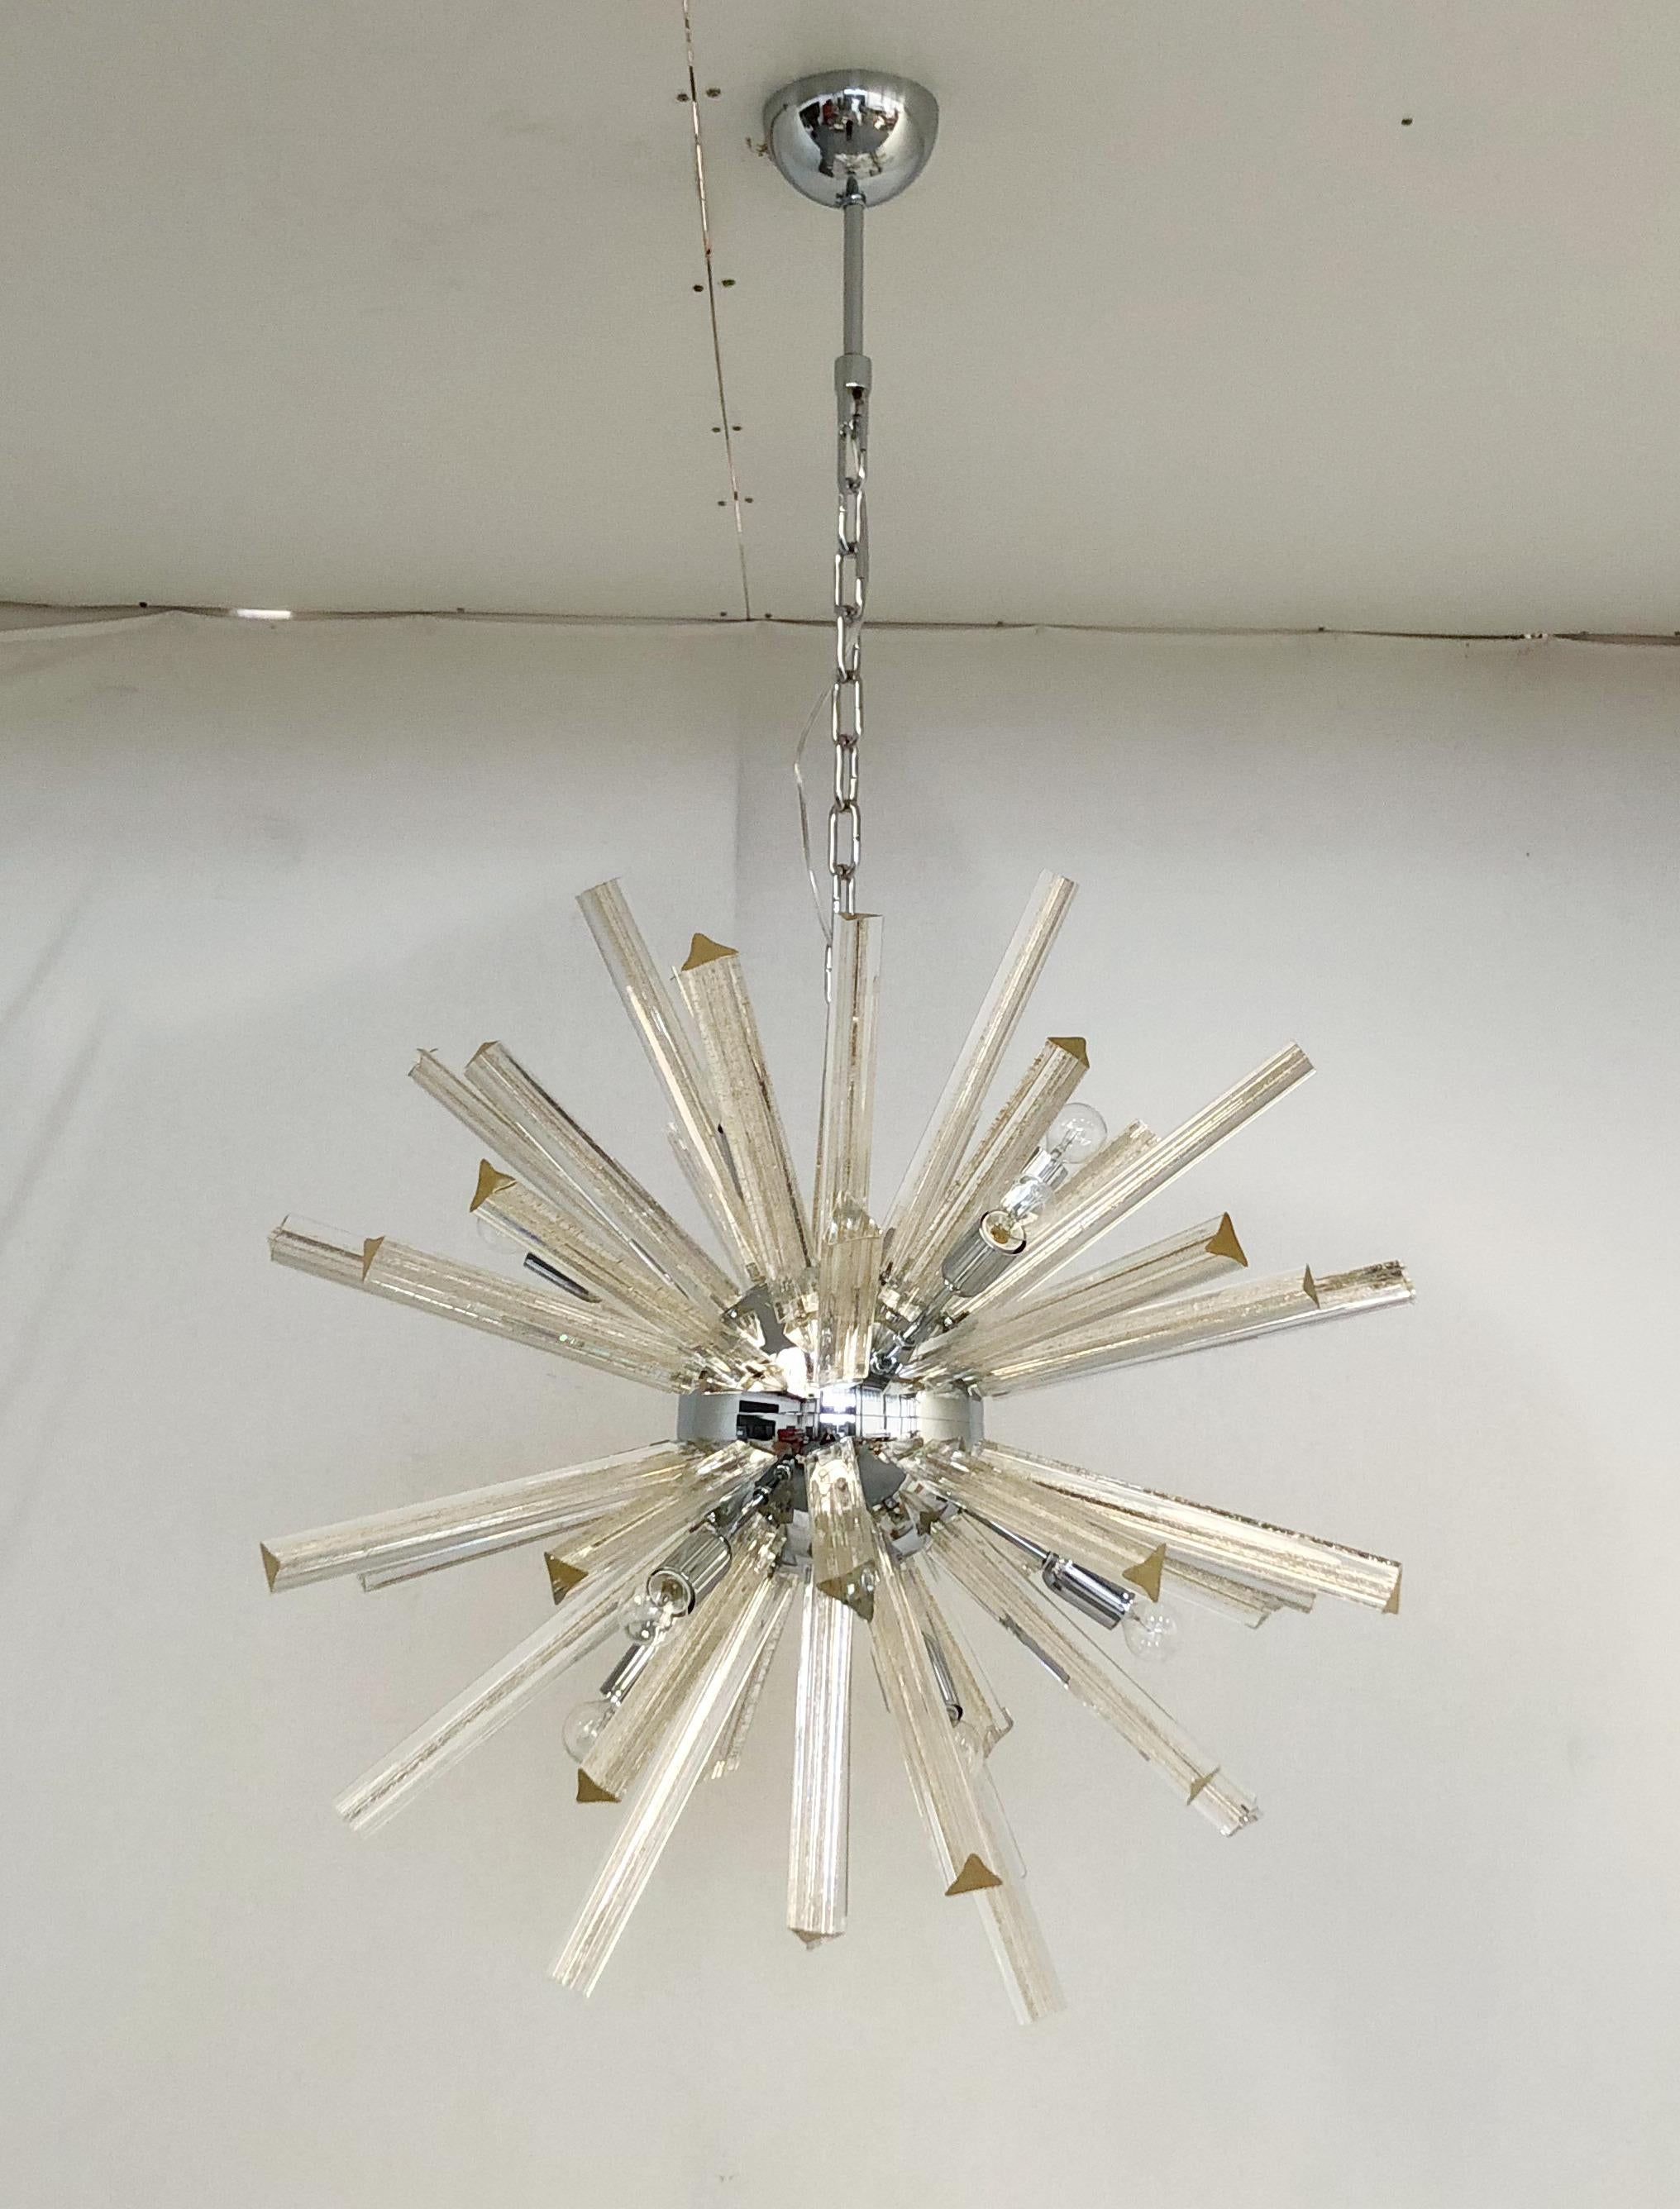 Italian Sputnik chandelier with Murano glasses hand blown into three points using Triedri technique and infused with gold flecks, mounted on polished chrome metal finish frame / Designed by Fabio Bergomi for Fabio Ltd inspired by Venini / Made in